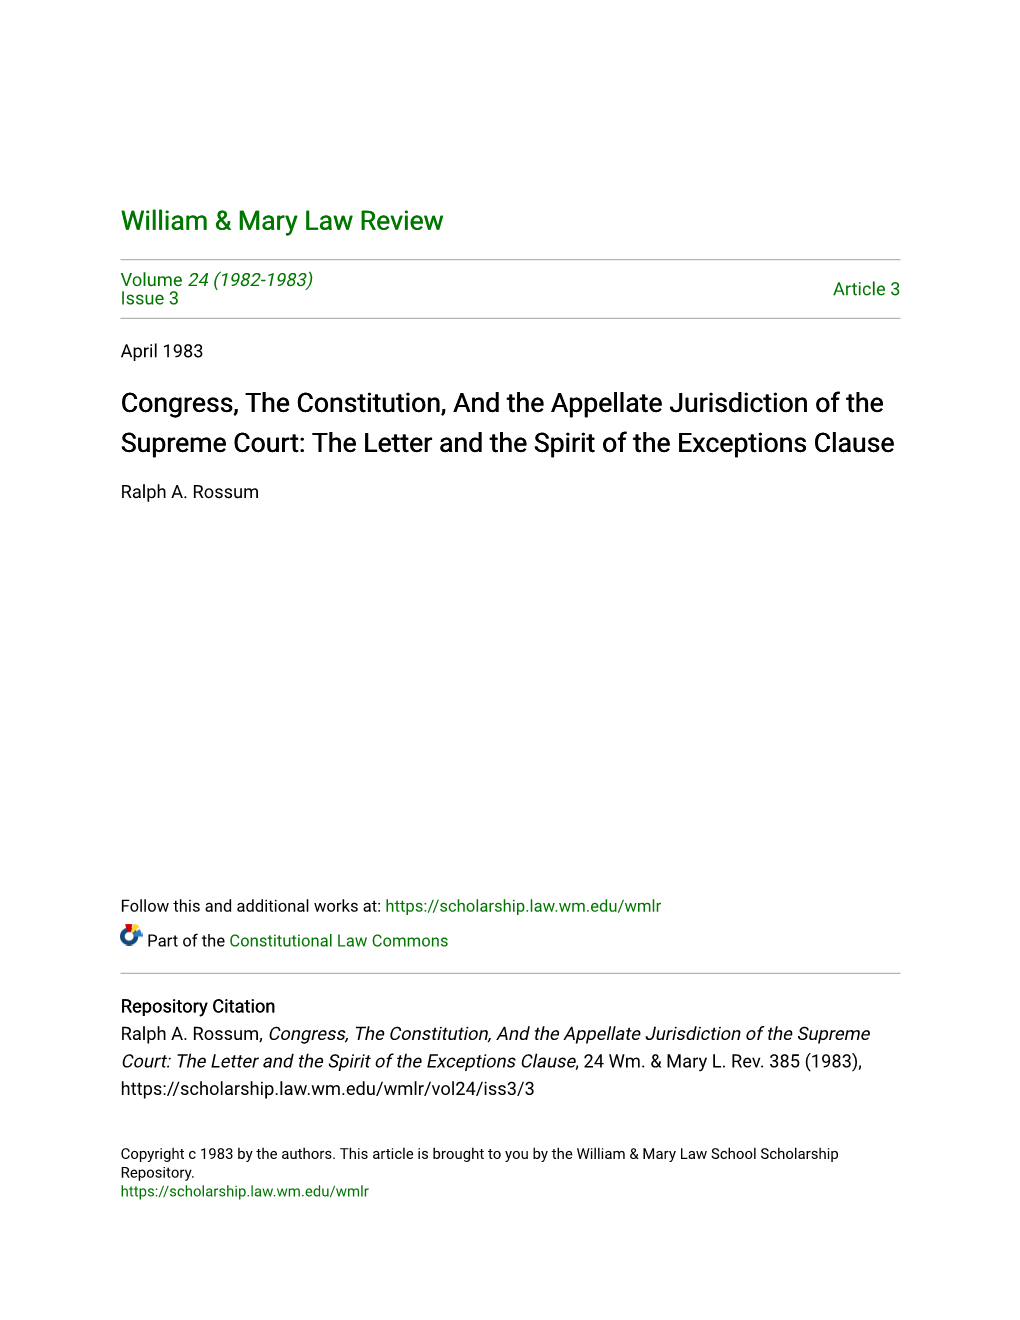 Congress, the Constitution, and the Appellate Jurisdiction of the Supreme Court: the Letter and the Spirit of the Exceptions Clause